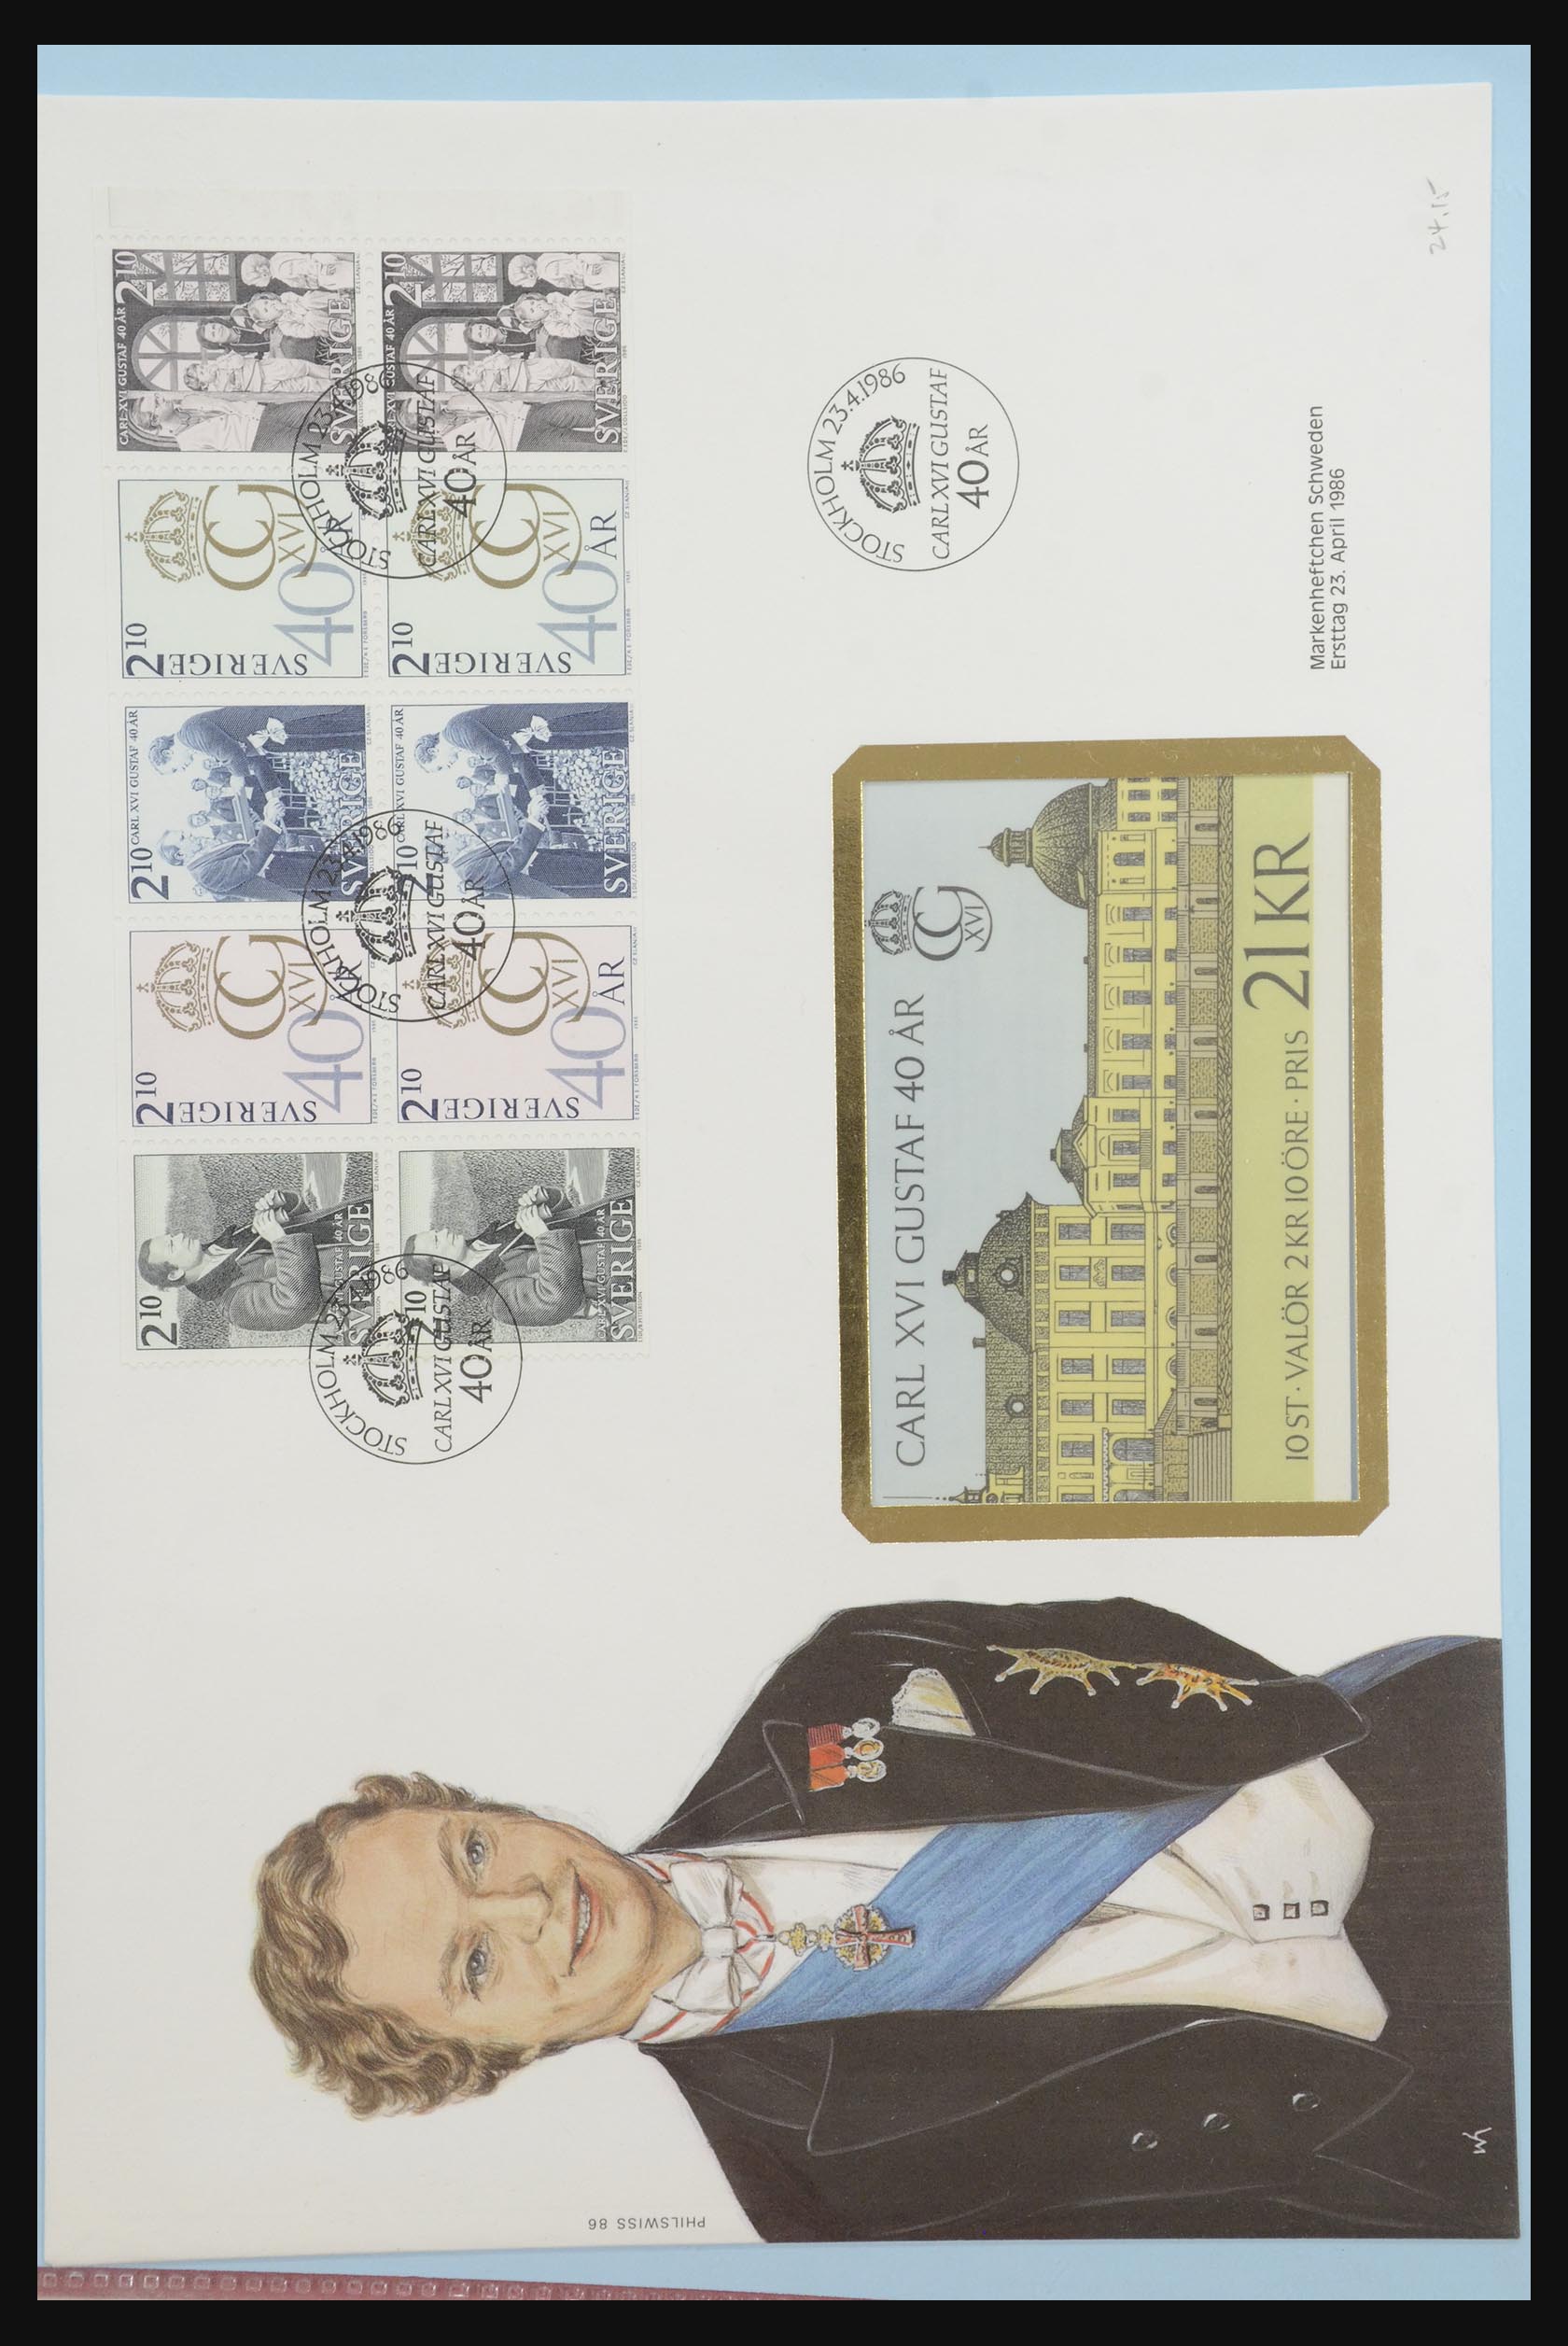 31915 381 - 31915 Western Europe souvenir sheets and stamp booklets on FDC.